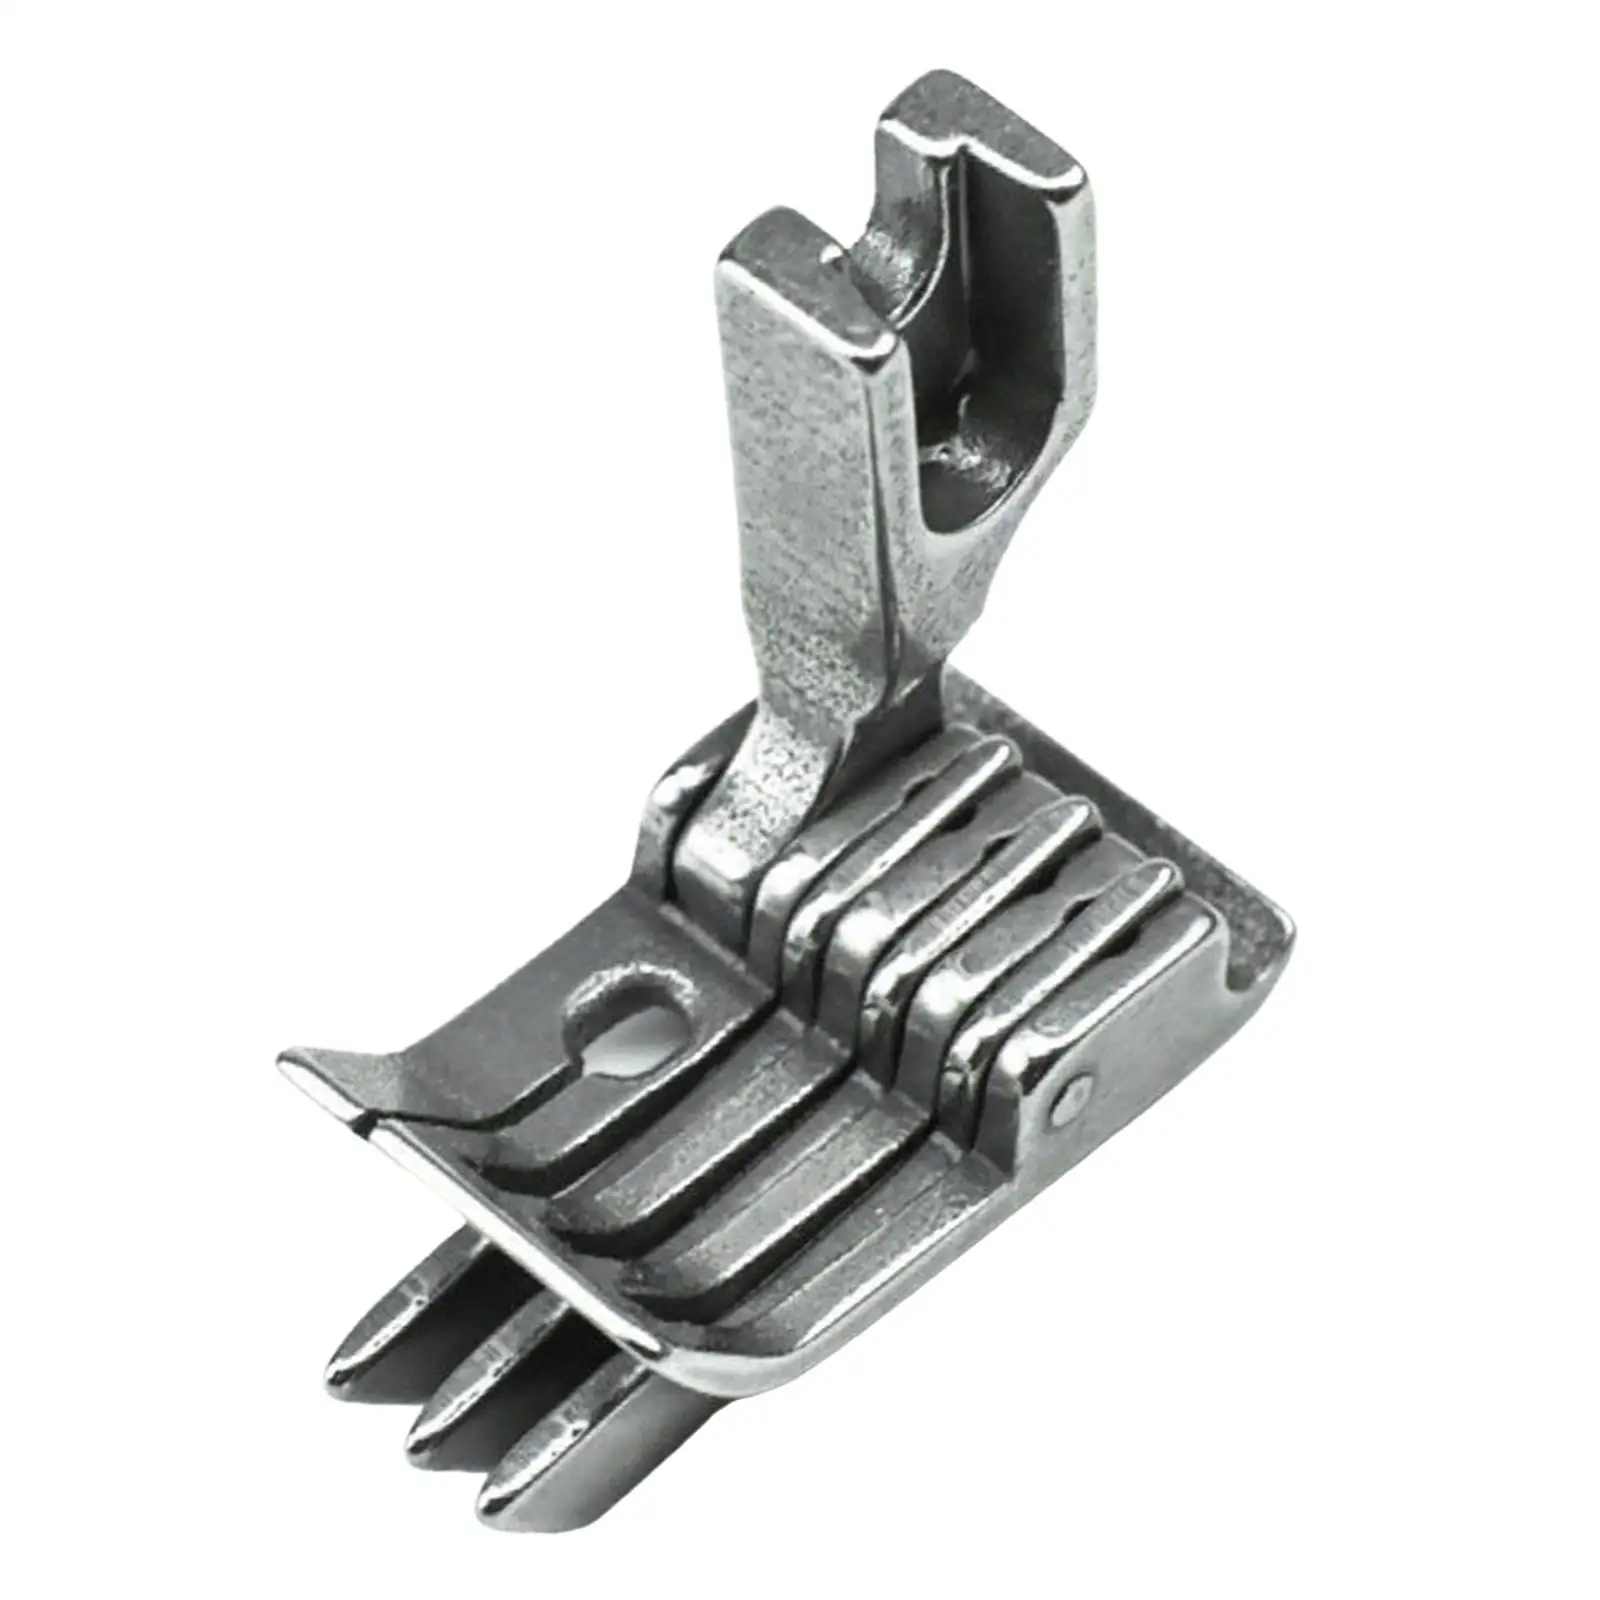 Sewing Machine Presser Feet Edge Stitch Foot for Overlock Top Stitching Sewing Parts Accessory